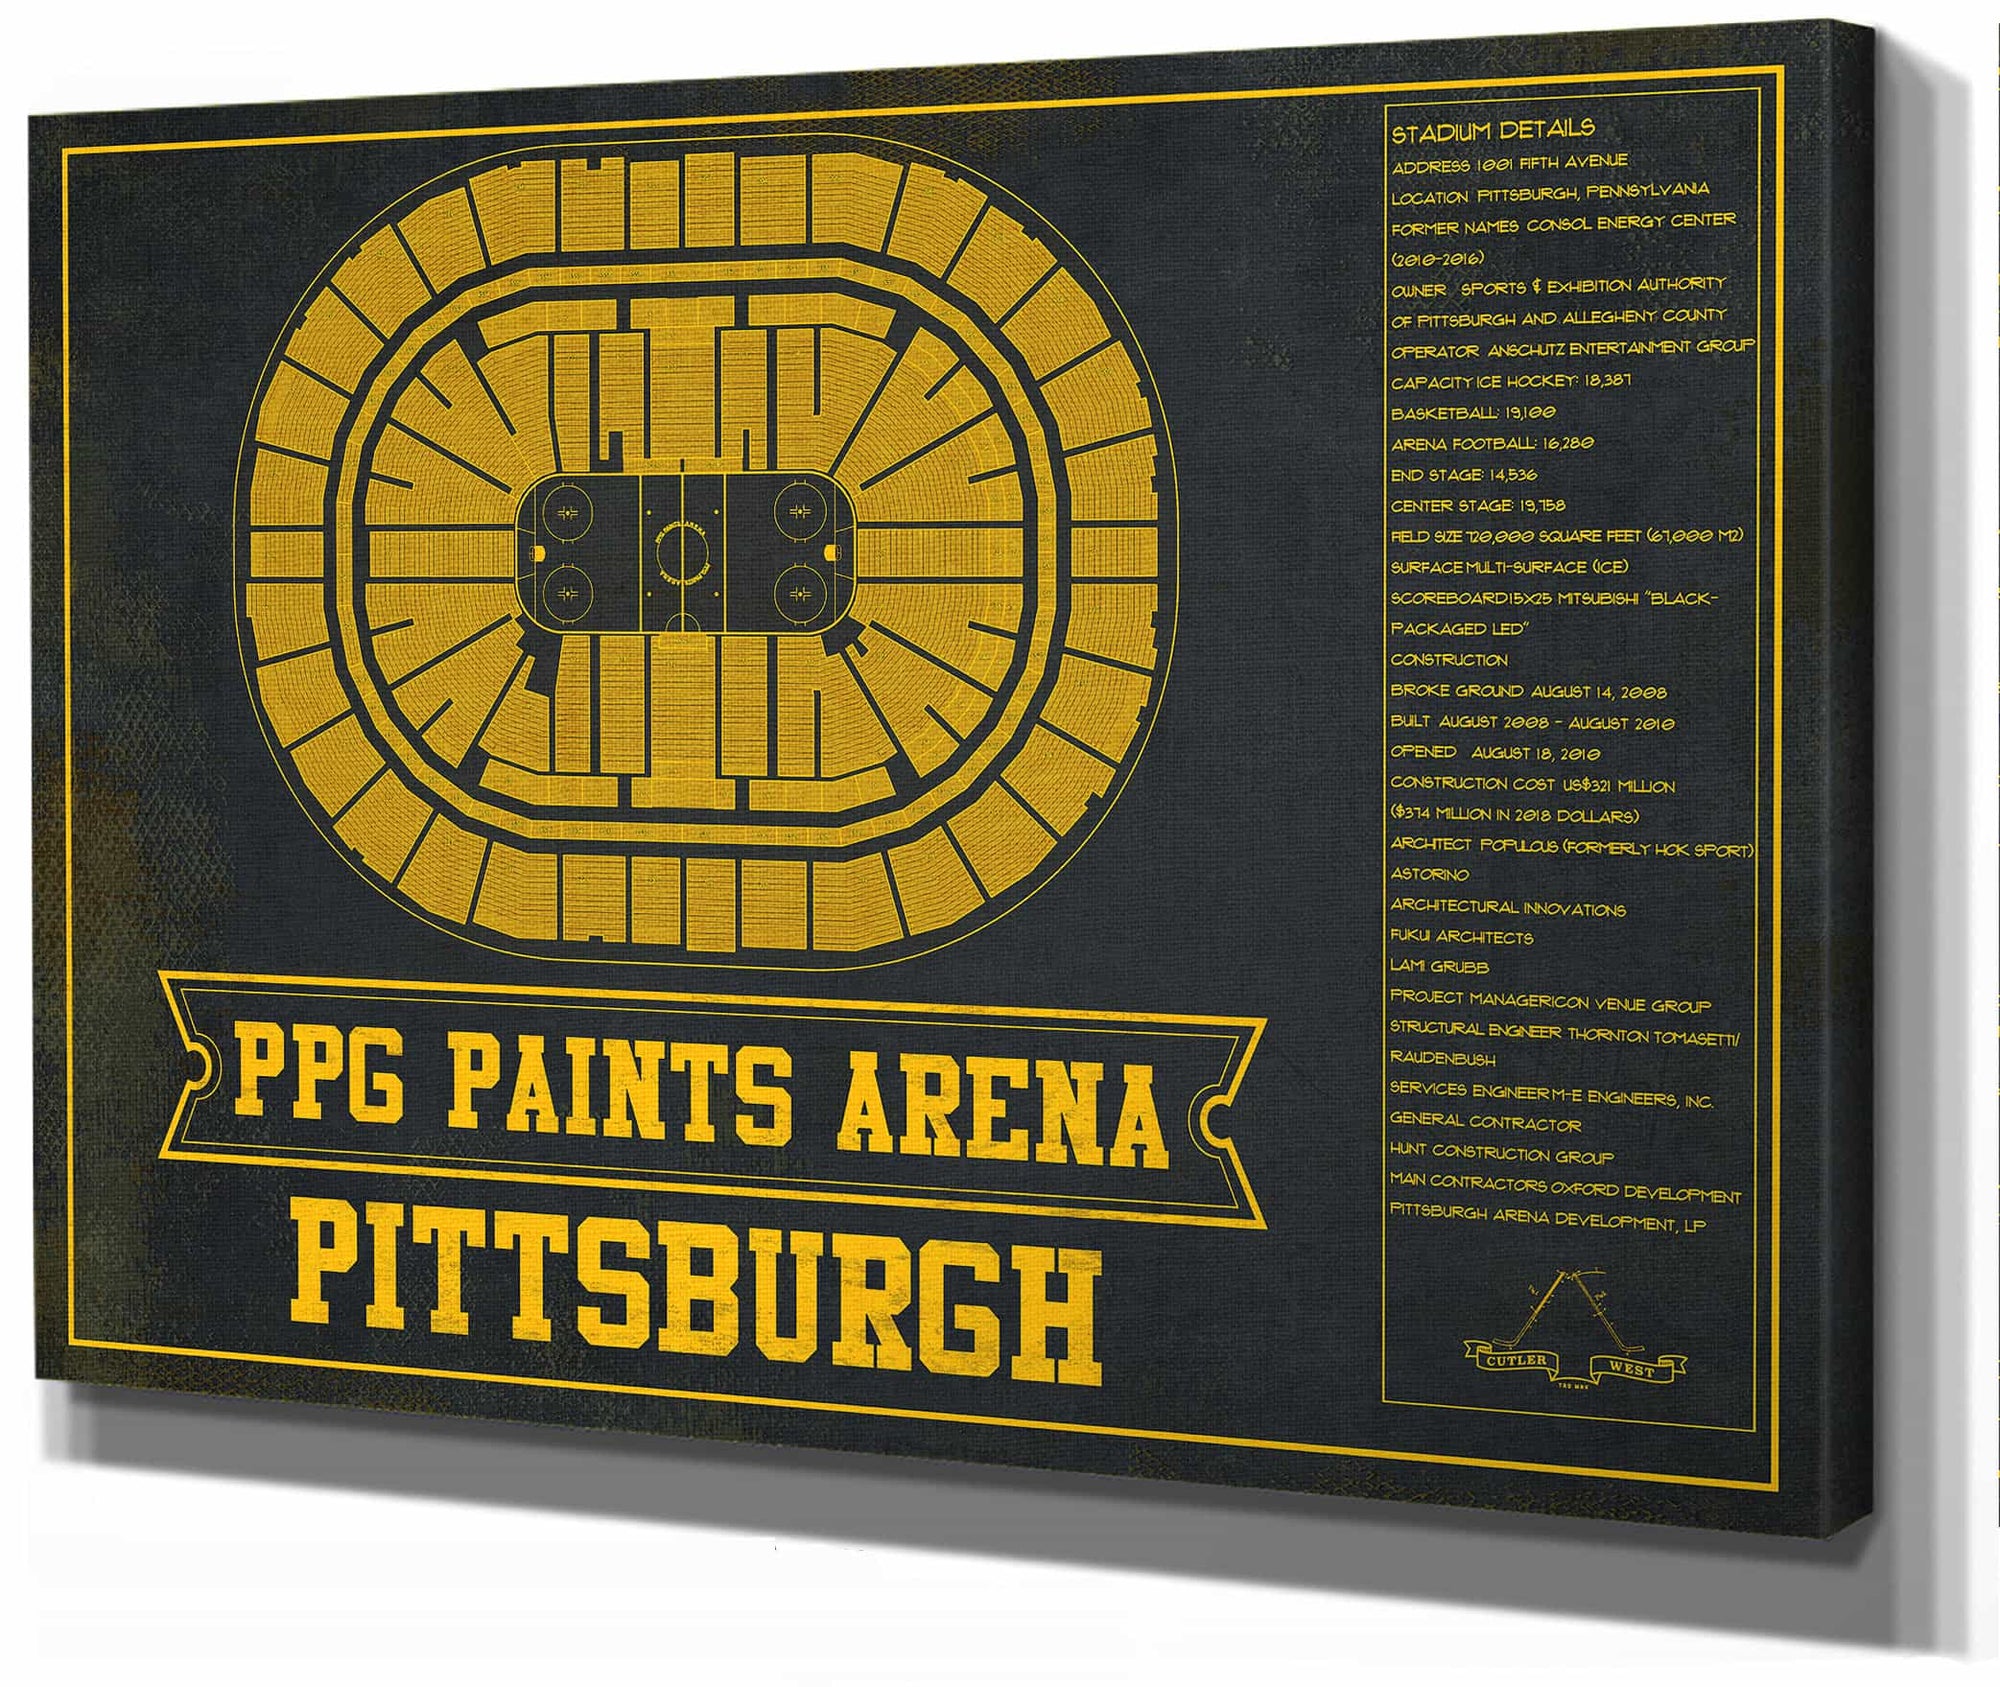 Pittsburgh Penguins PPG Paints Arena Seating Chart - Vintage Hockey Team Color Print